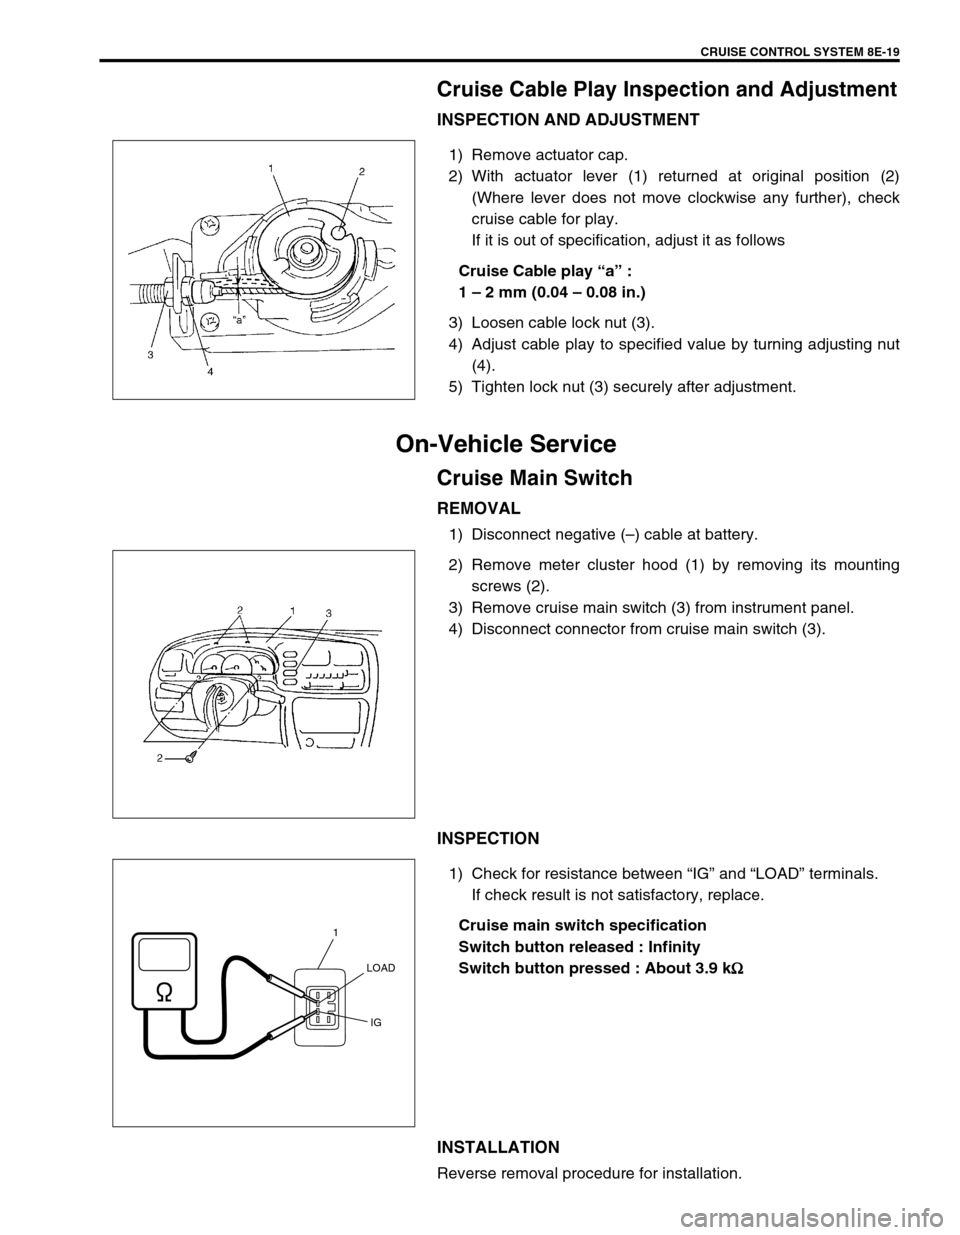 SUZUKI GRAND VITARA 1999 2.G Owners Manual CRUISE CONTROL SYSTEM 8E-19
Cruise Cable Play Inspection and Adjustment
INSPECTION AND ADJUSTMENT
1) Remove actuator cap.
2) With actuator lever (1) returned at original position (2)
(Where lever does